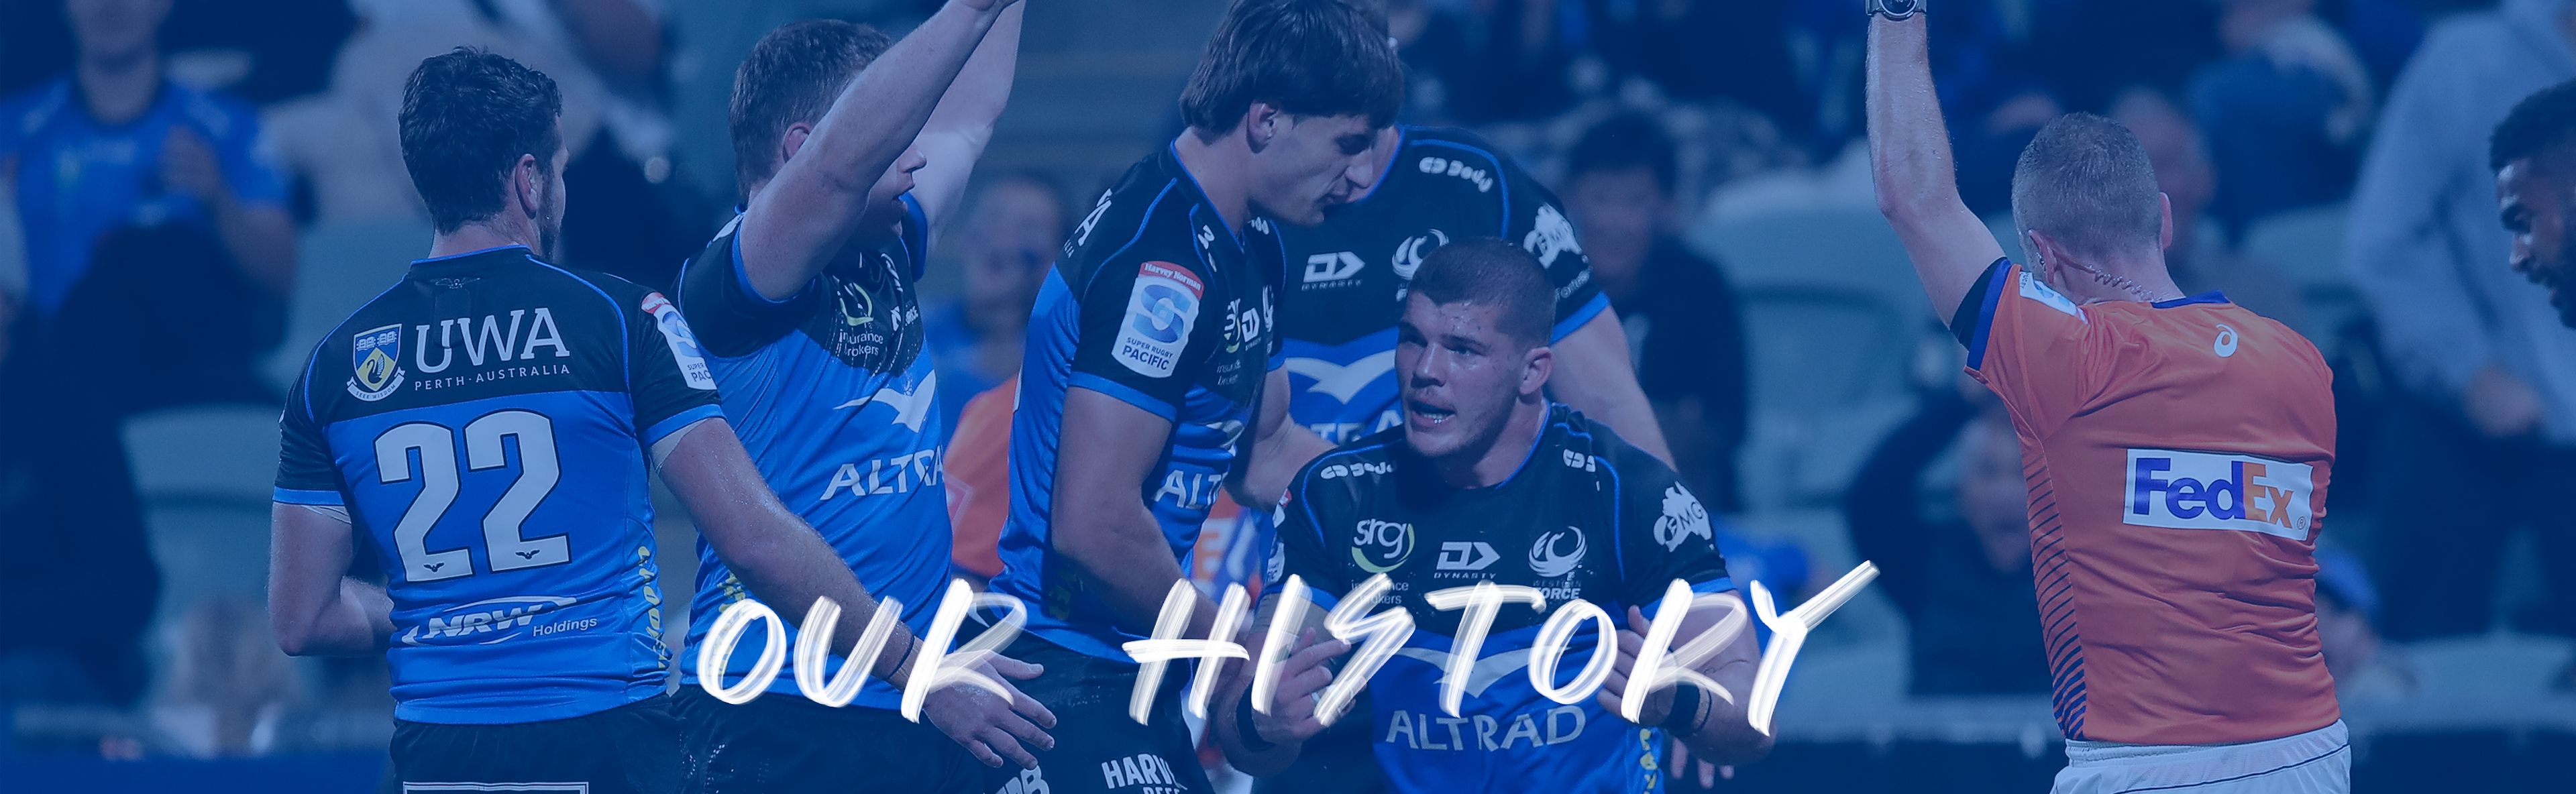 Western Force Our HIstory_Banner